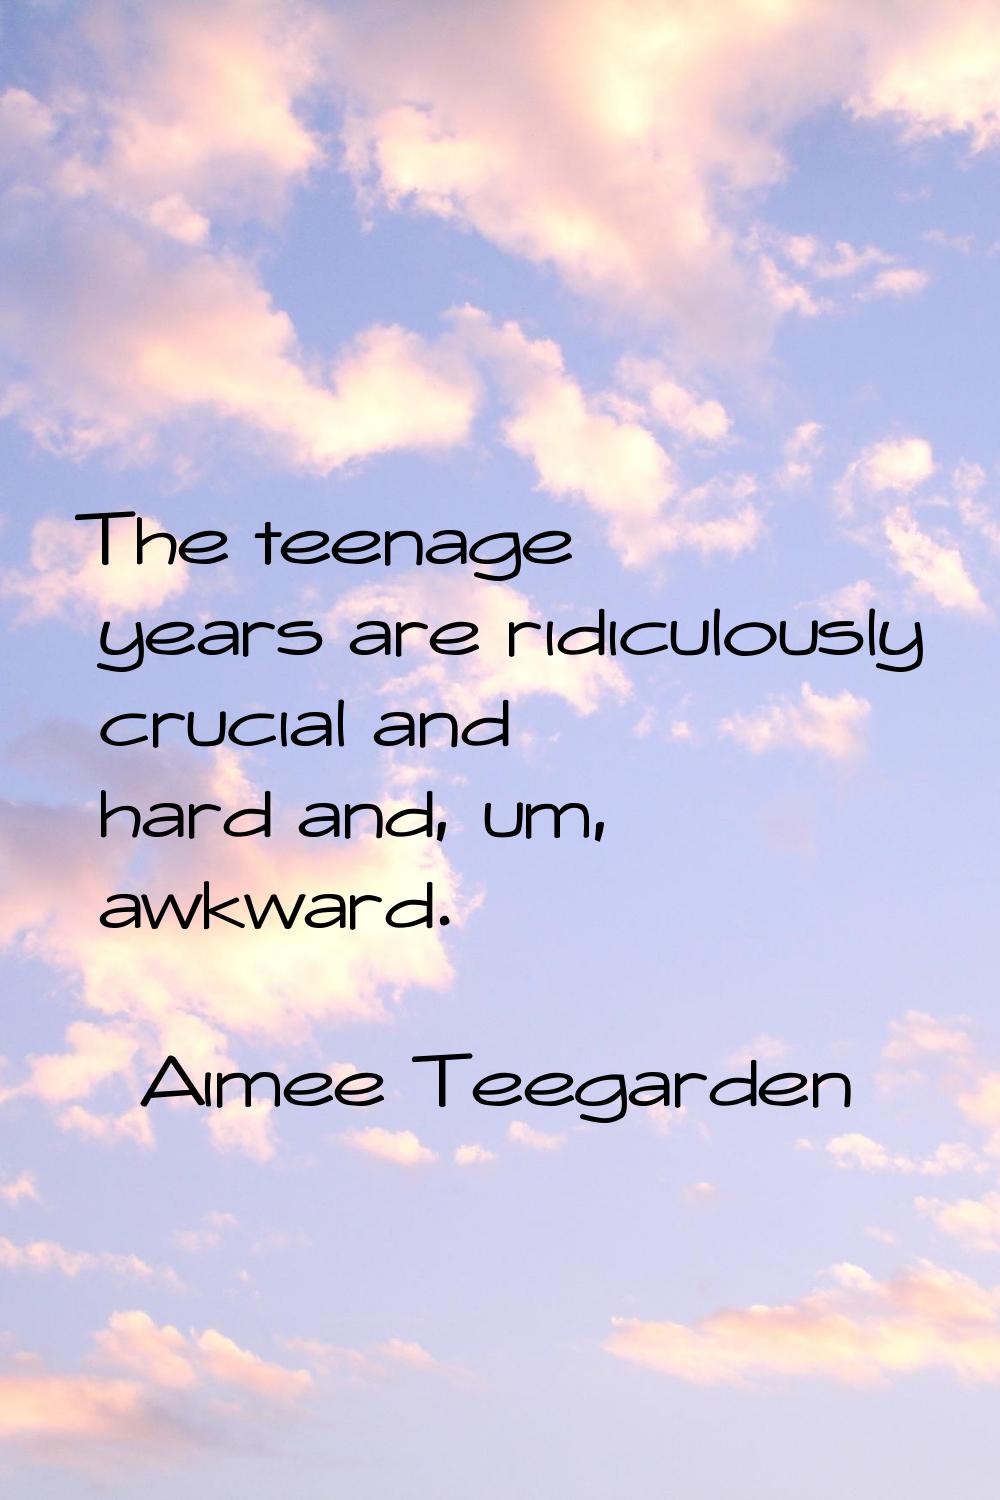 The teenage years are ridiculously crucial and hard and, um, awkward.